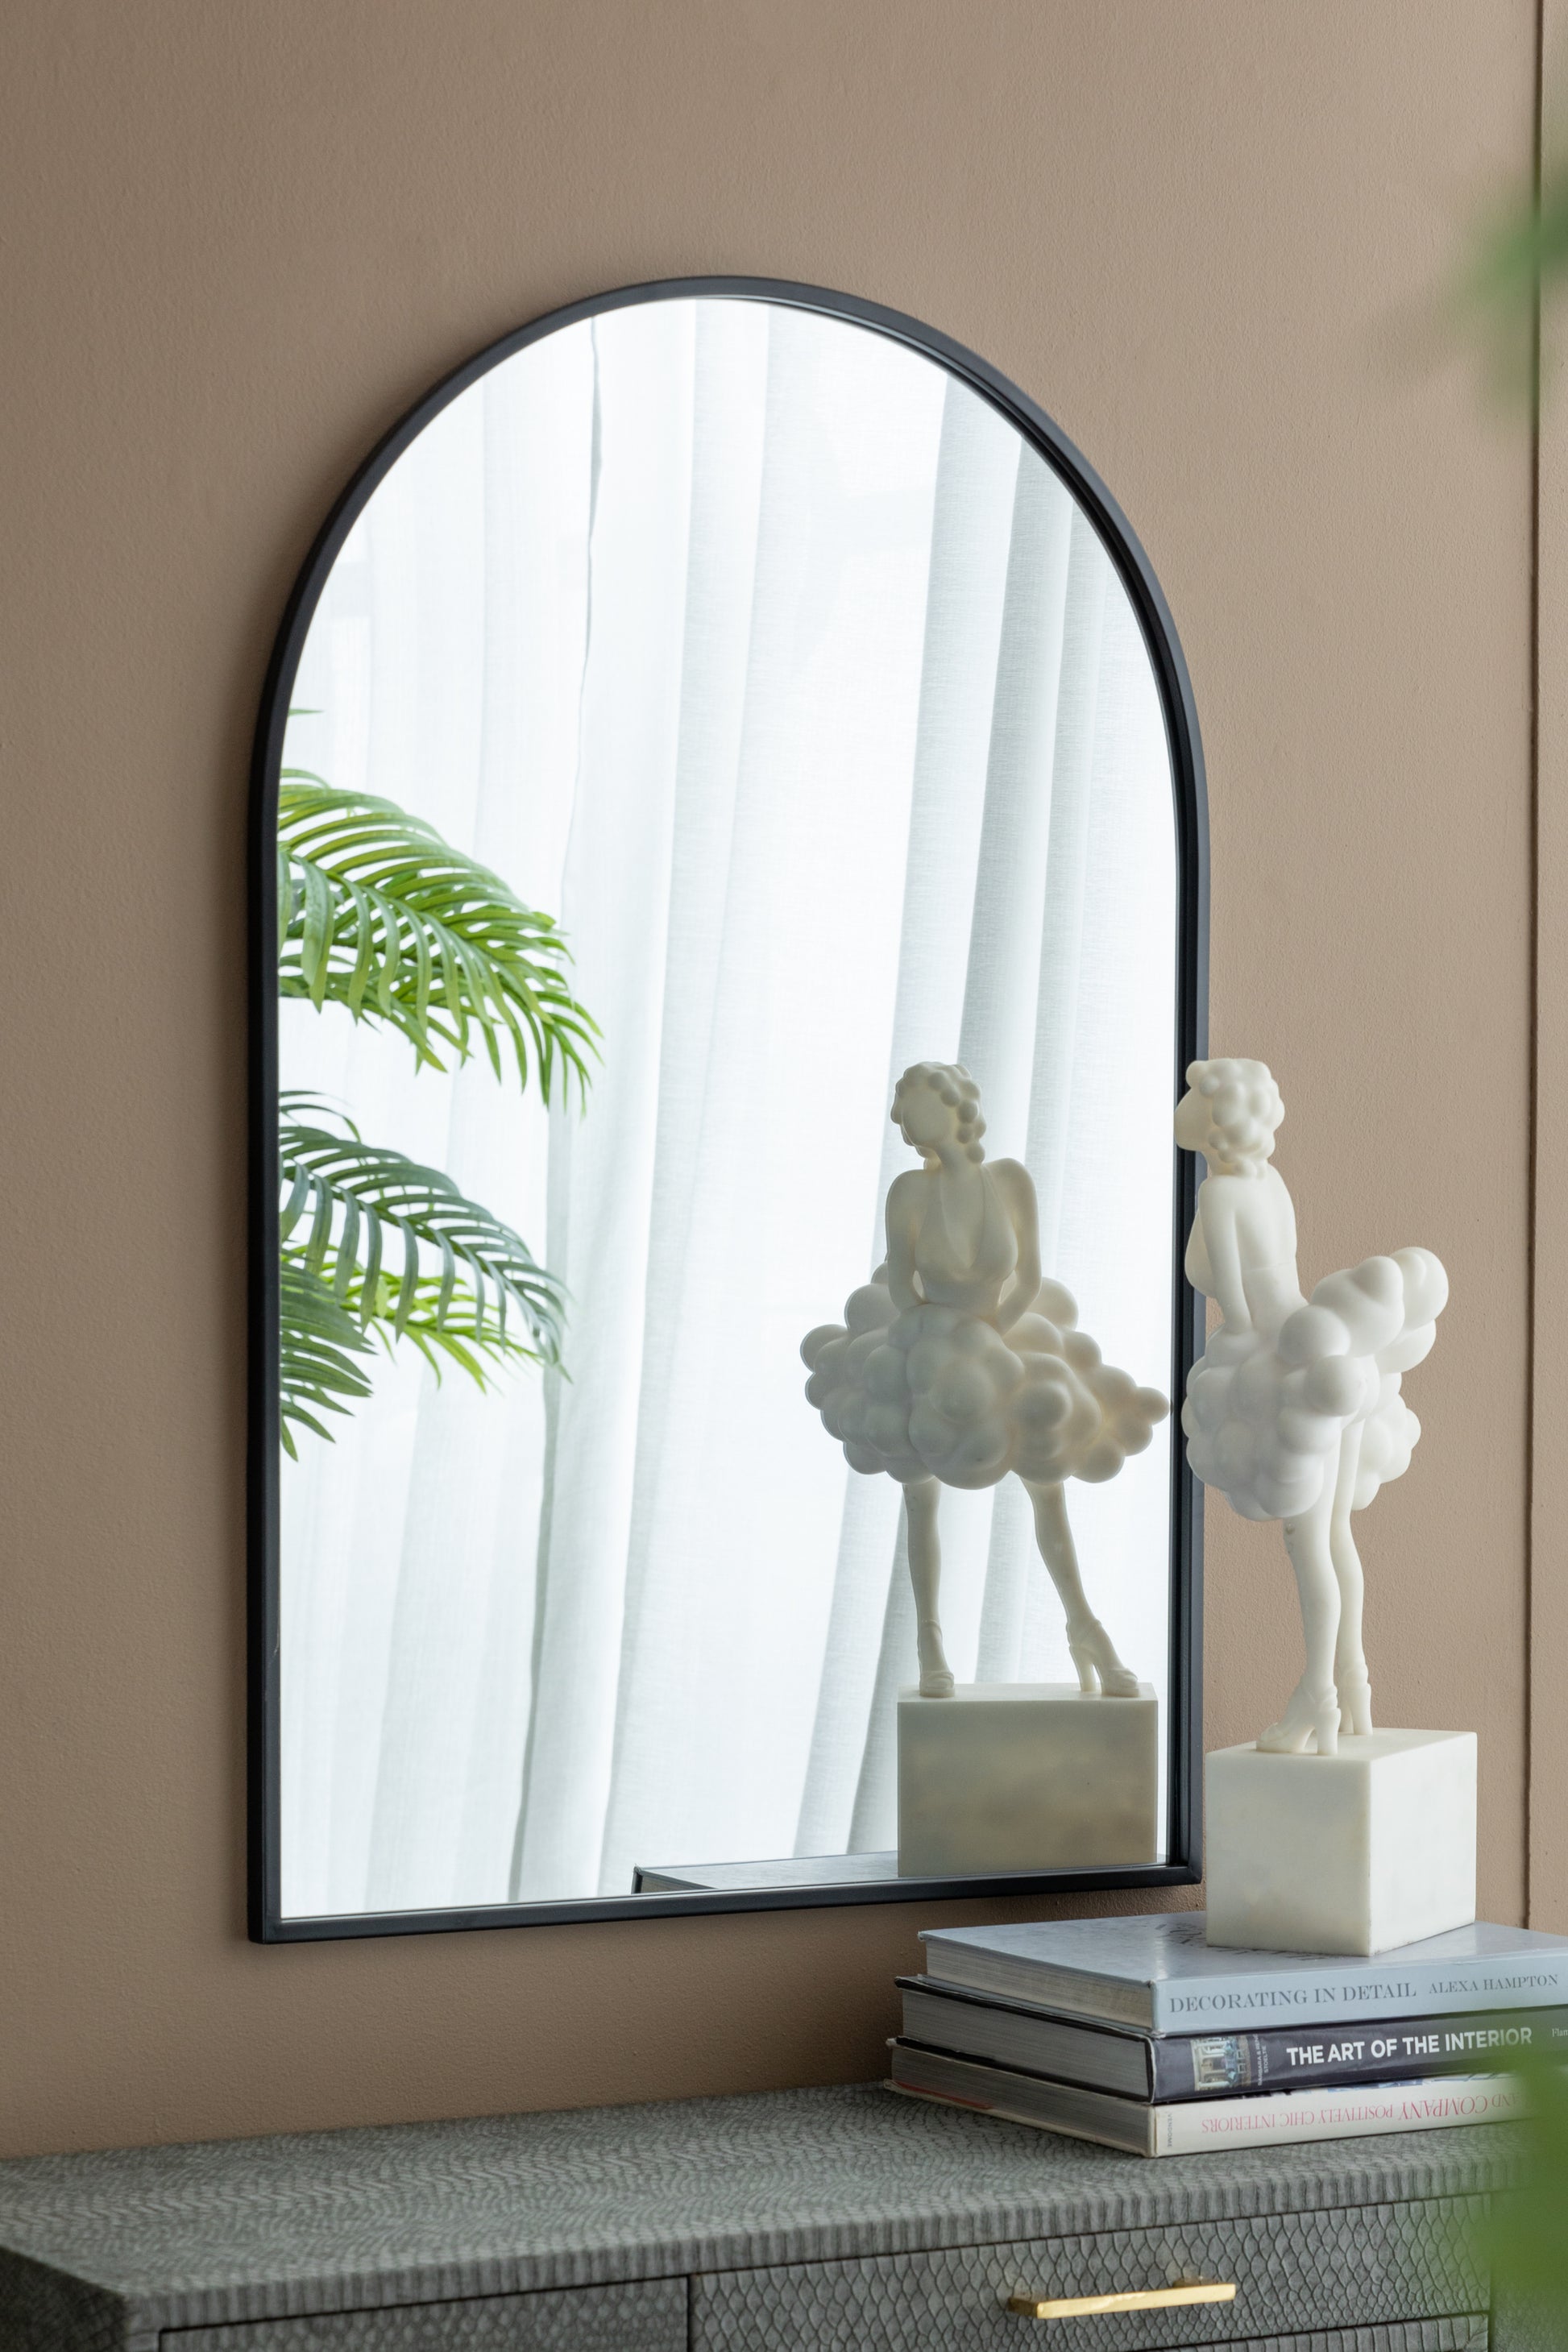 24" X 36" Black Arched Mirror With Metal Frame,